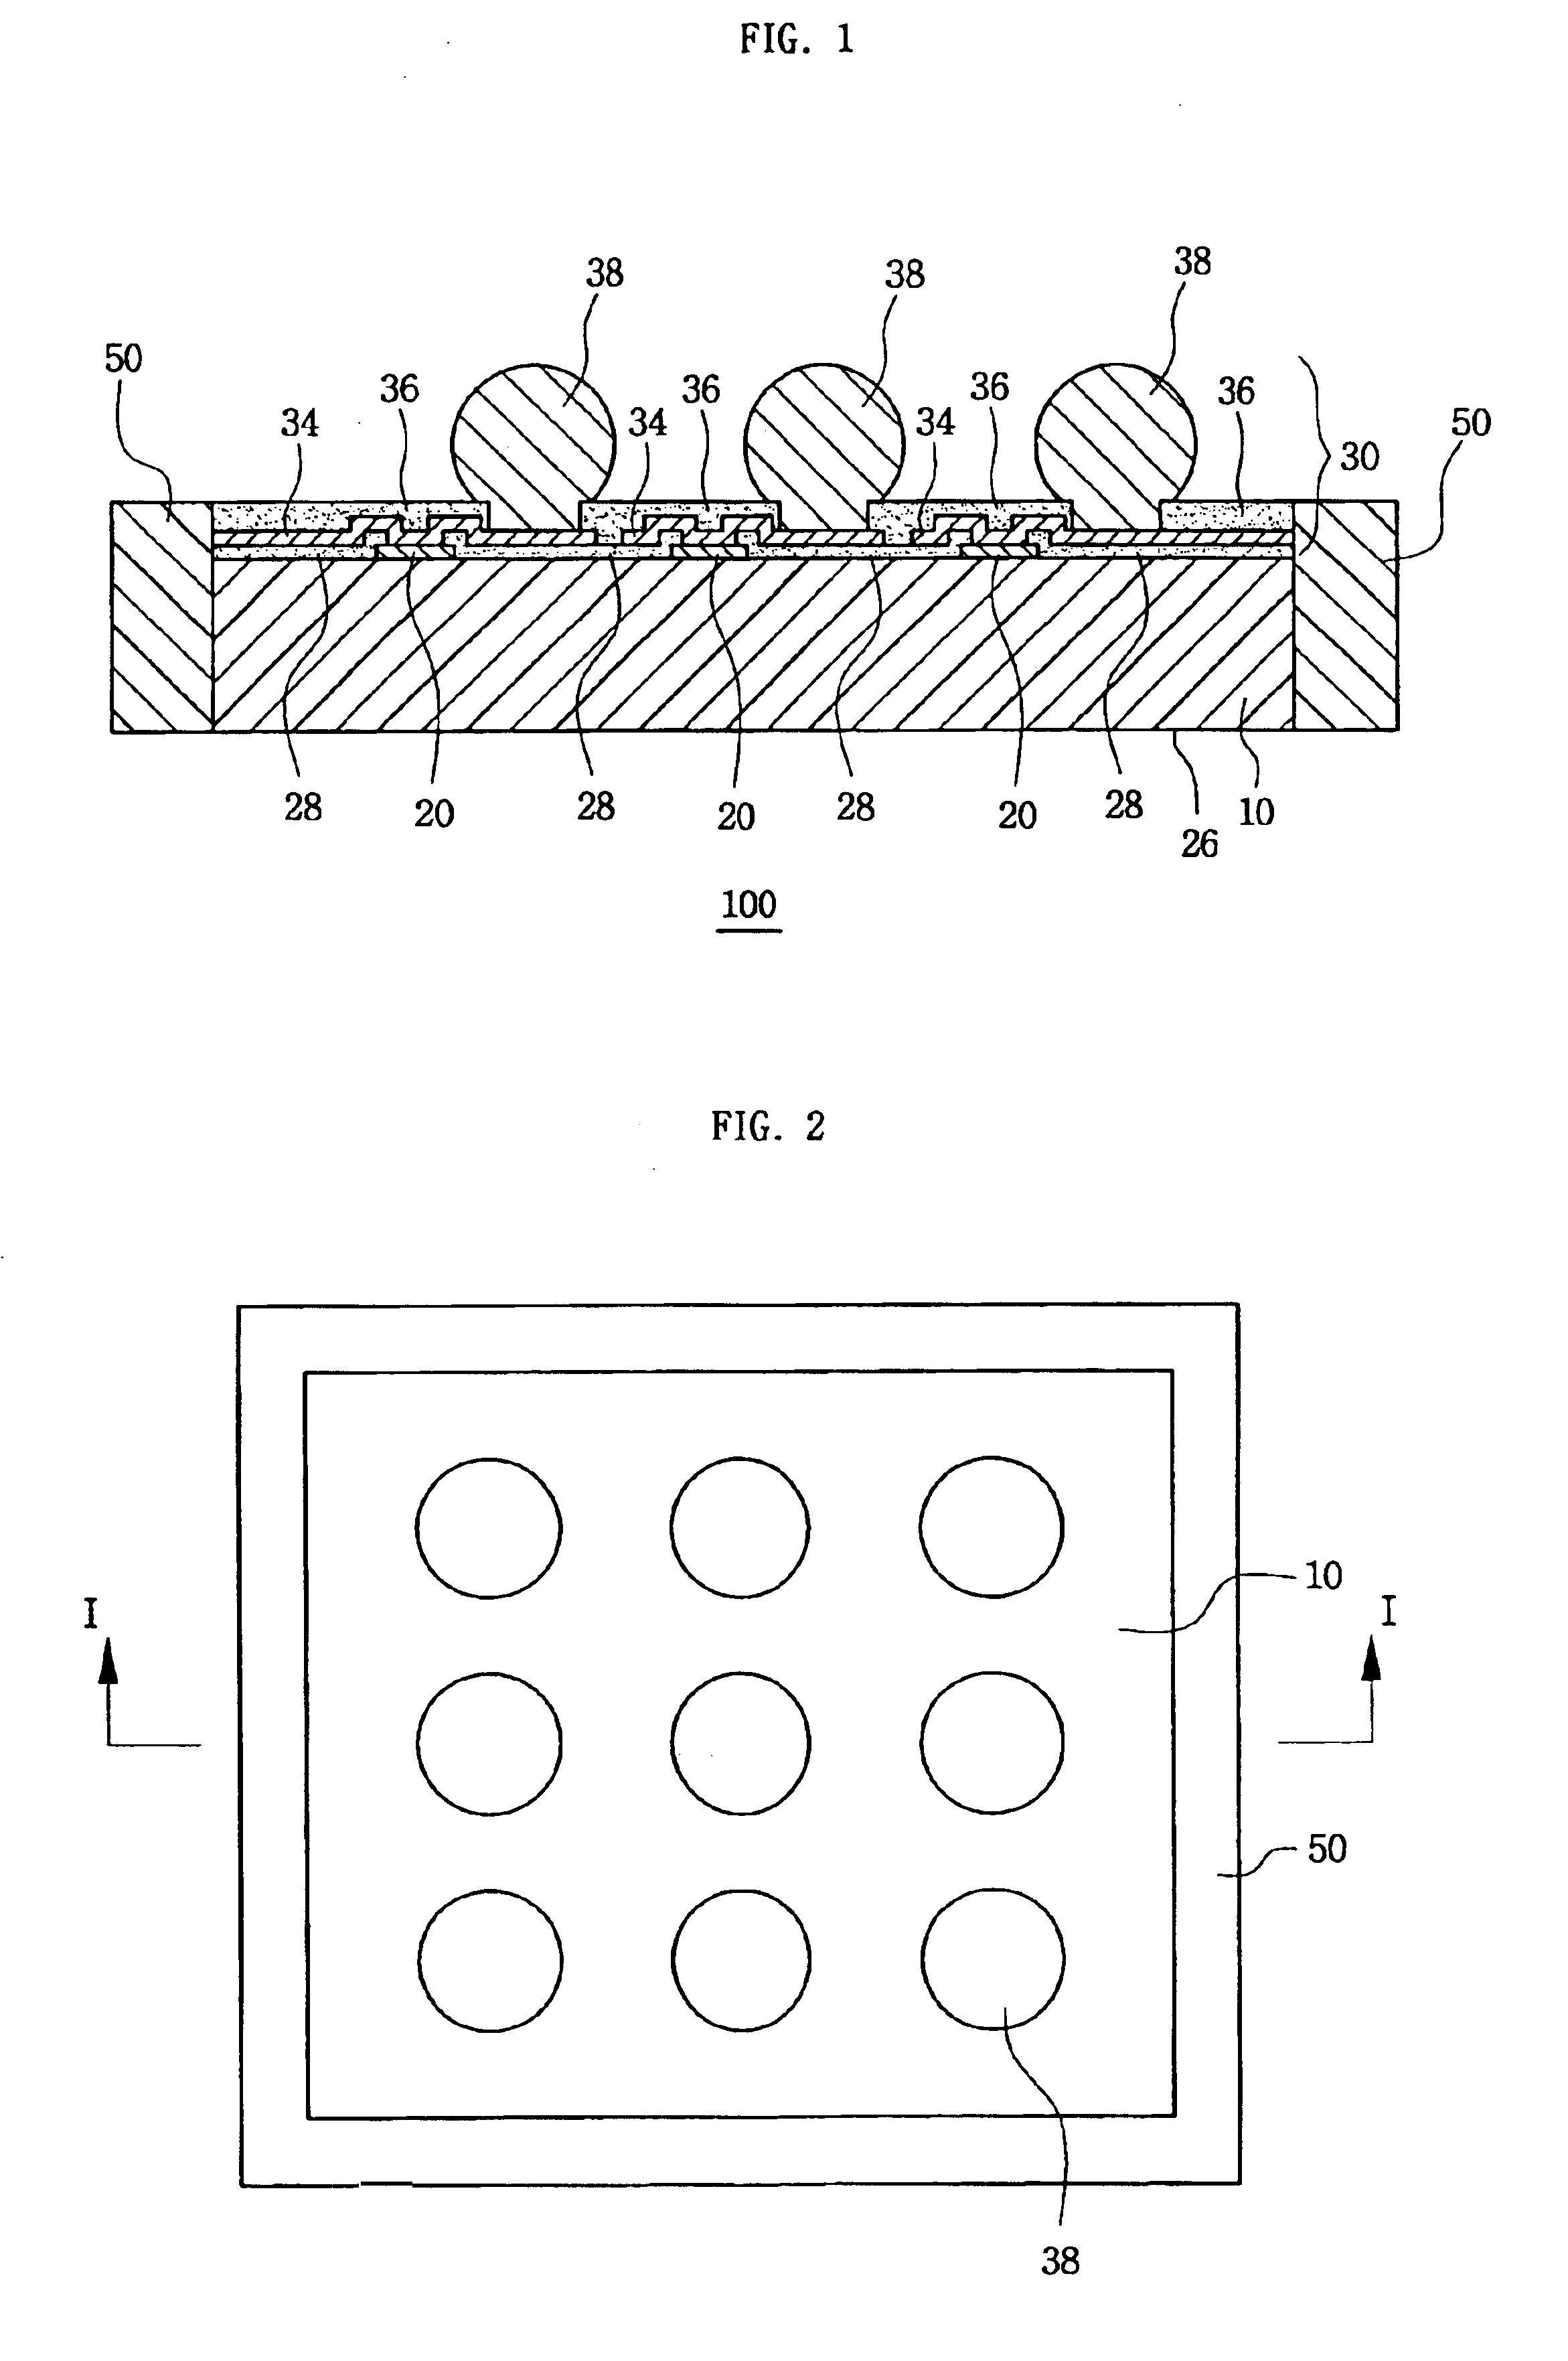 Wafer level package having a side package